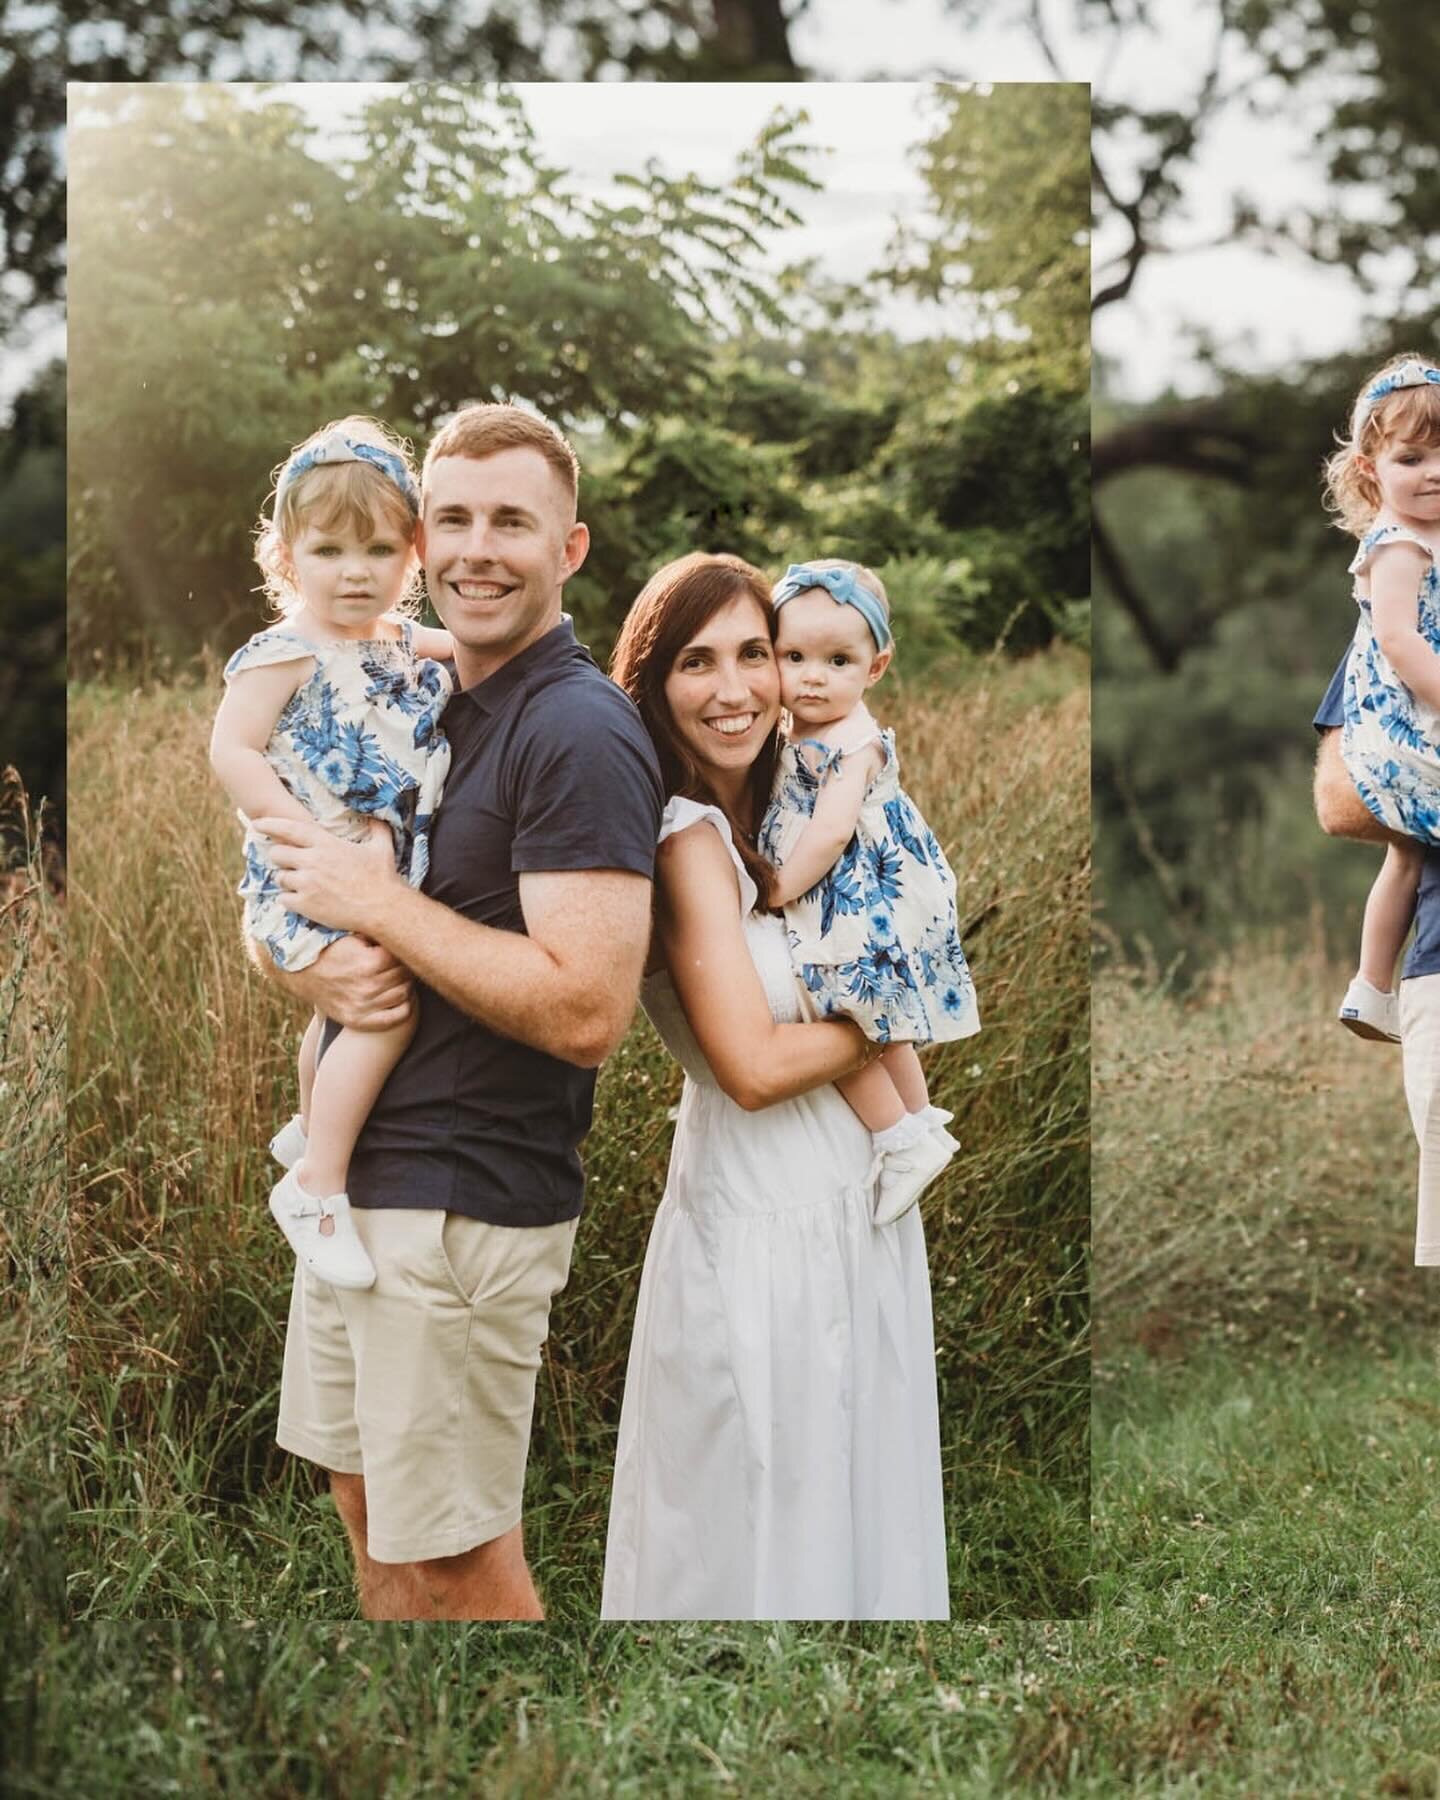 Looking to book a May-July family portrait (or outdoor maternity/outdoor cake smash) session?! Today&rsquo;s the day. 🙌🏻

Tonight at 8pm I&rsquo;ll send out an email with live links to book your family session. The openings are very limited. My kid